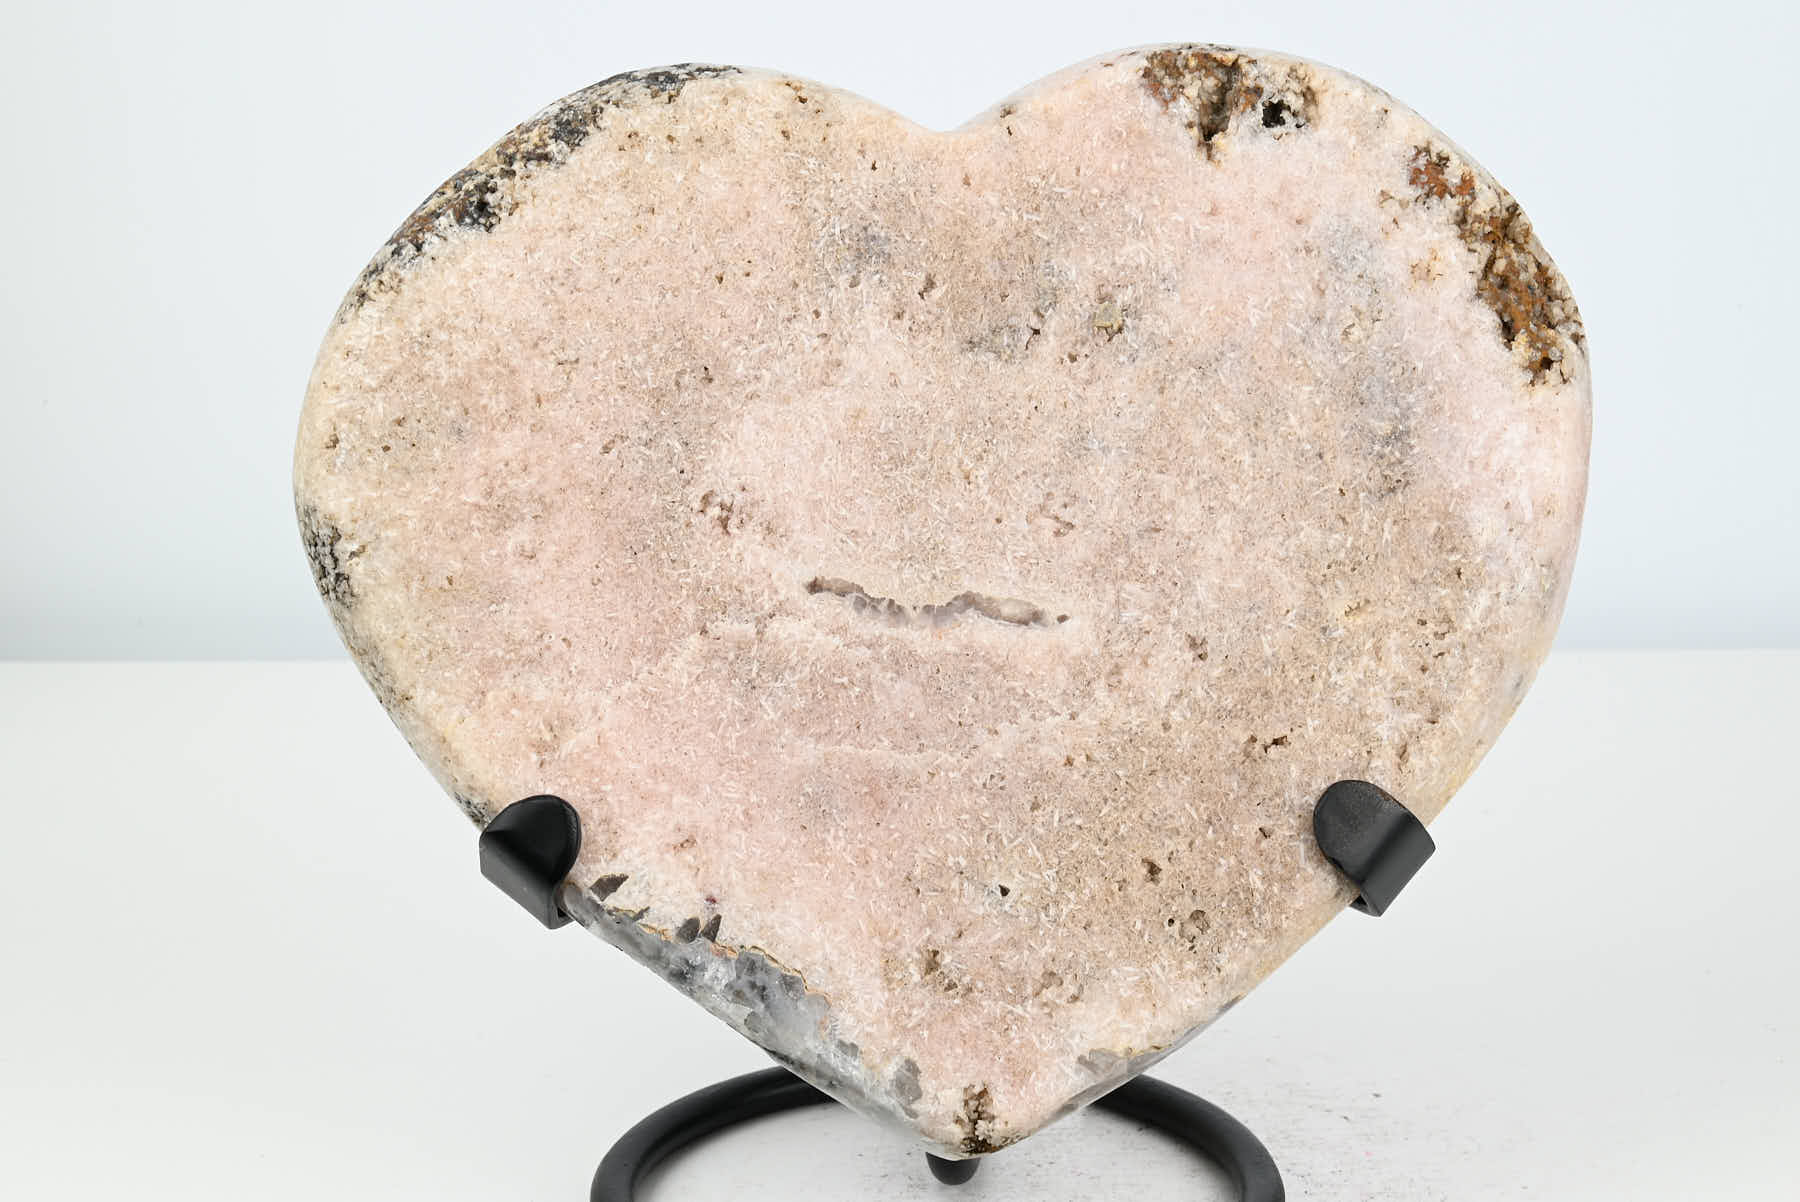 Extra Quality Pink Amethyst Heart - 2.52kg, 22cm high - #HTPINK-34002